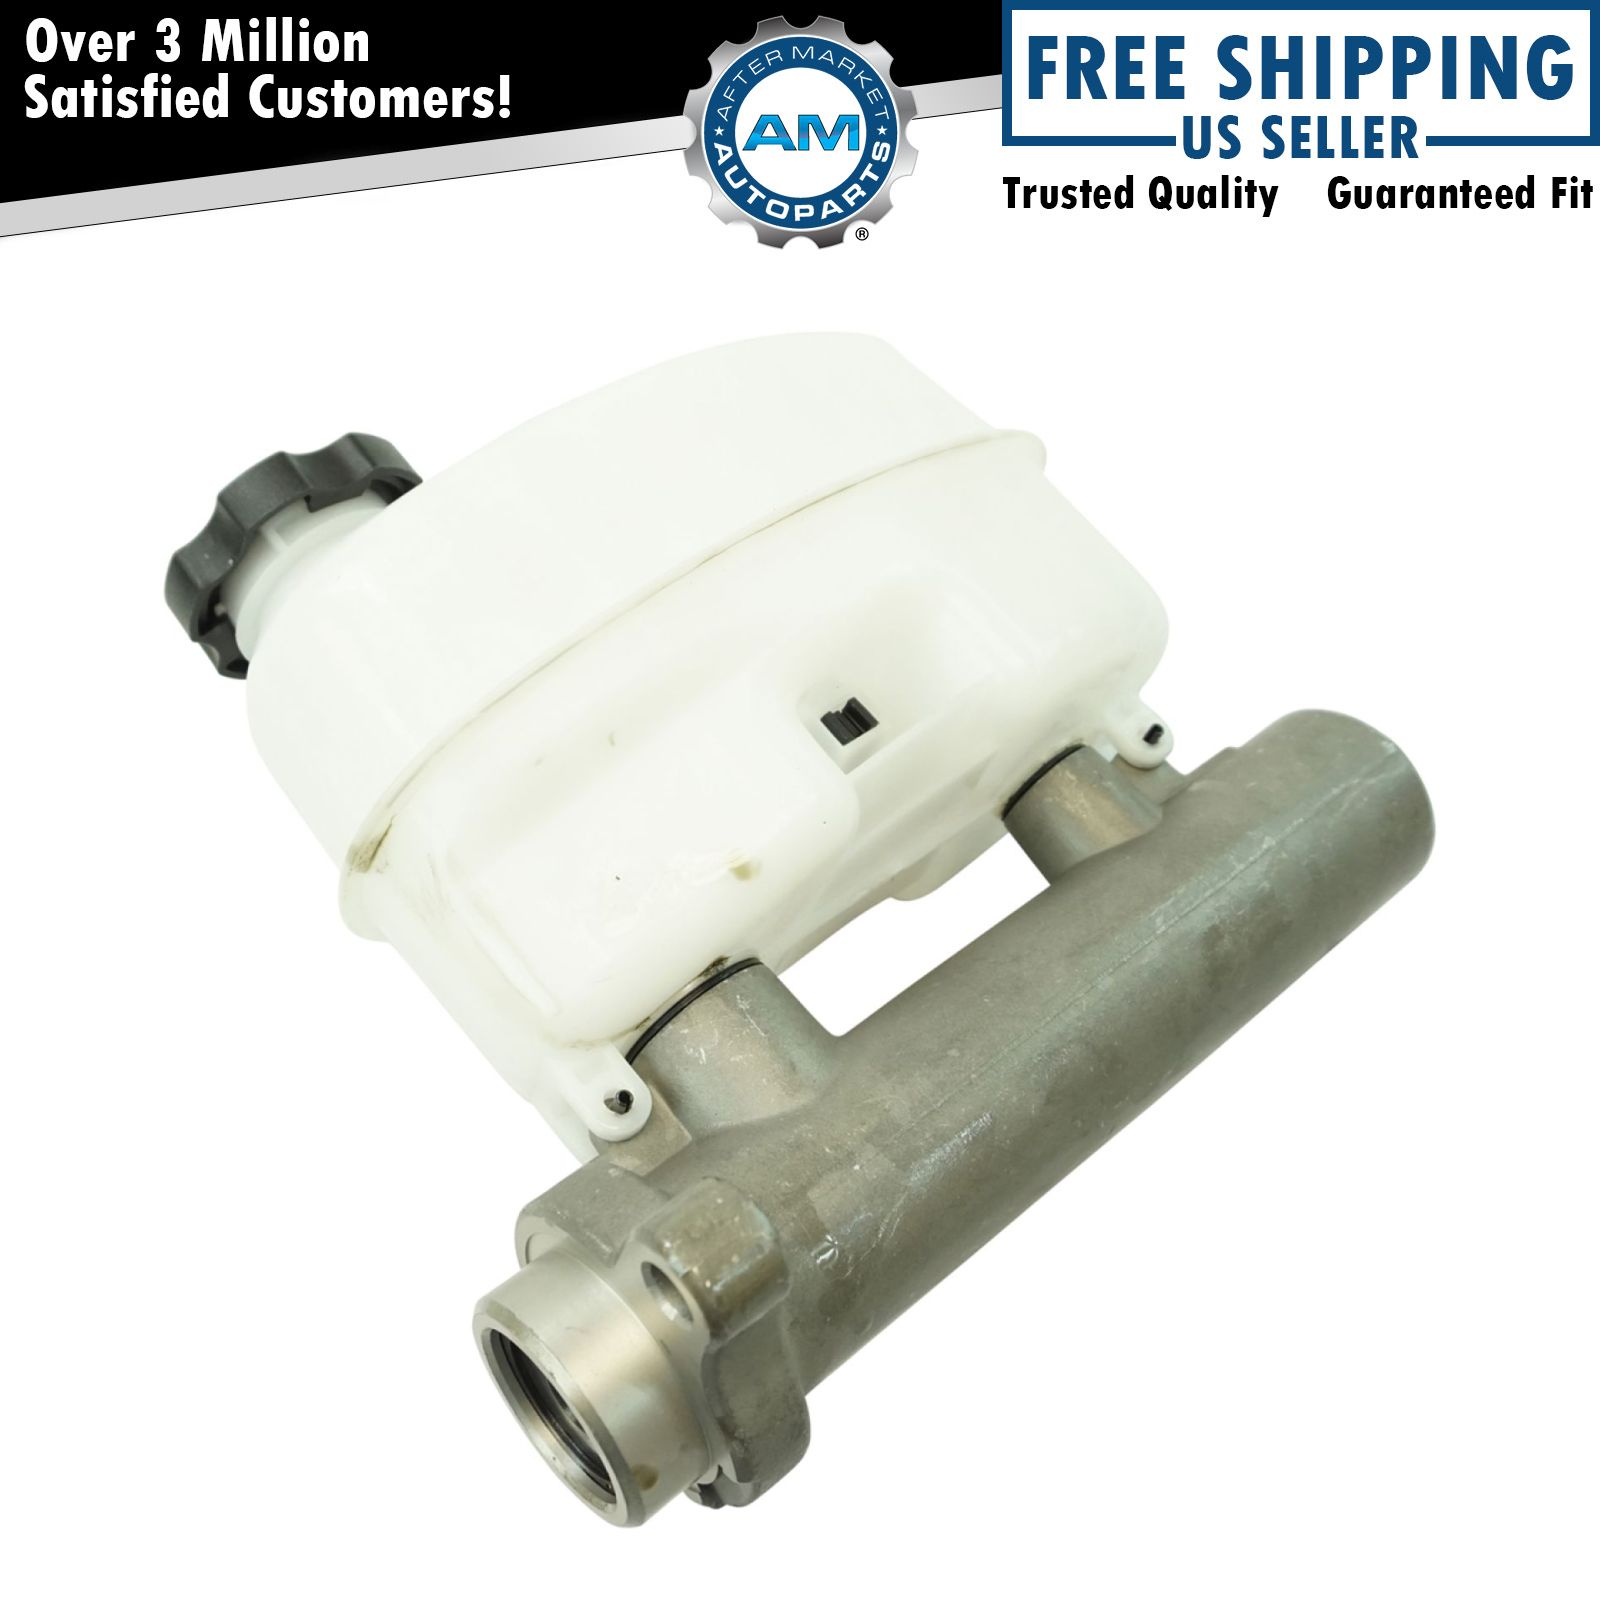 Brake Master Cylinder with Reservoir for Cadillac Chevrolet GMC Truck Pickup New